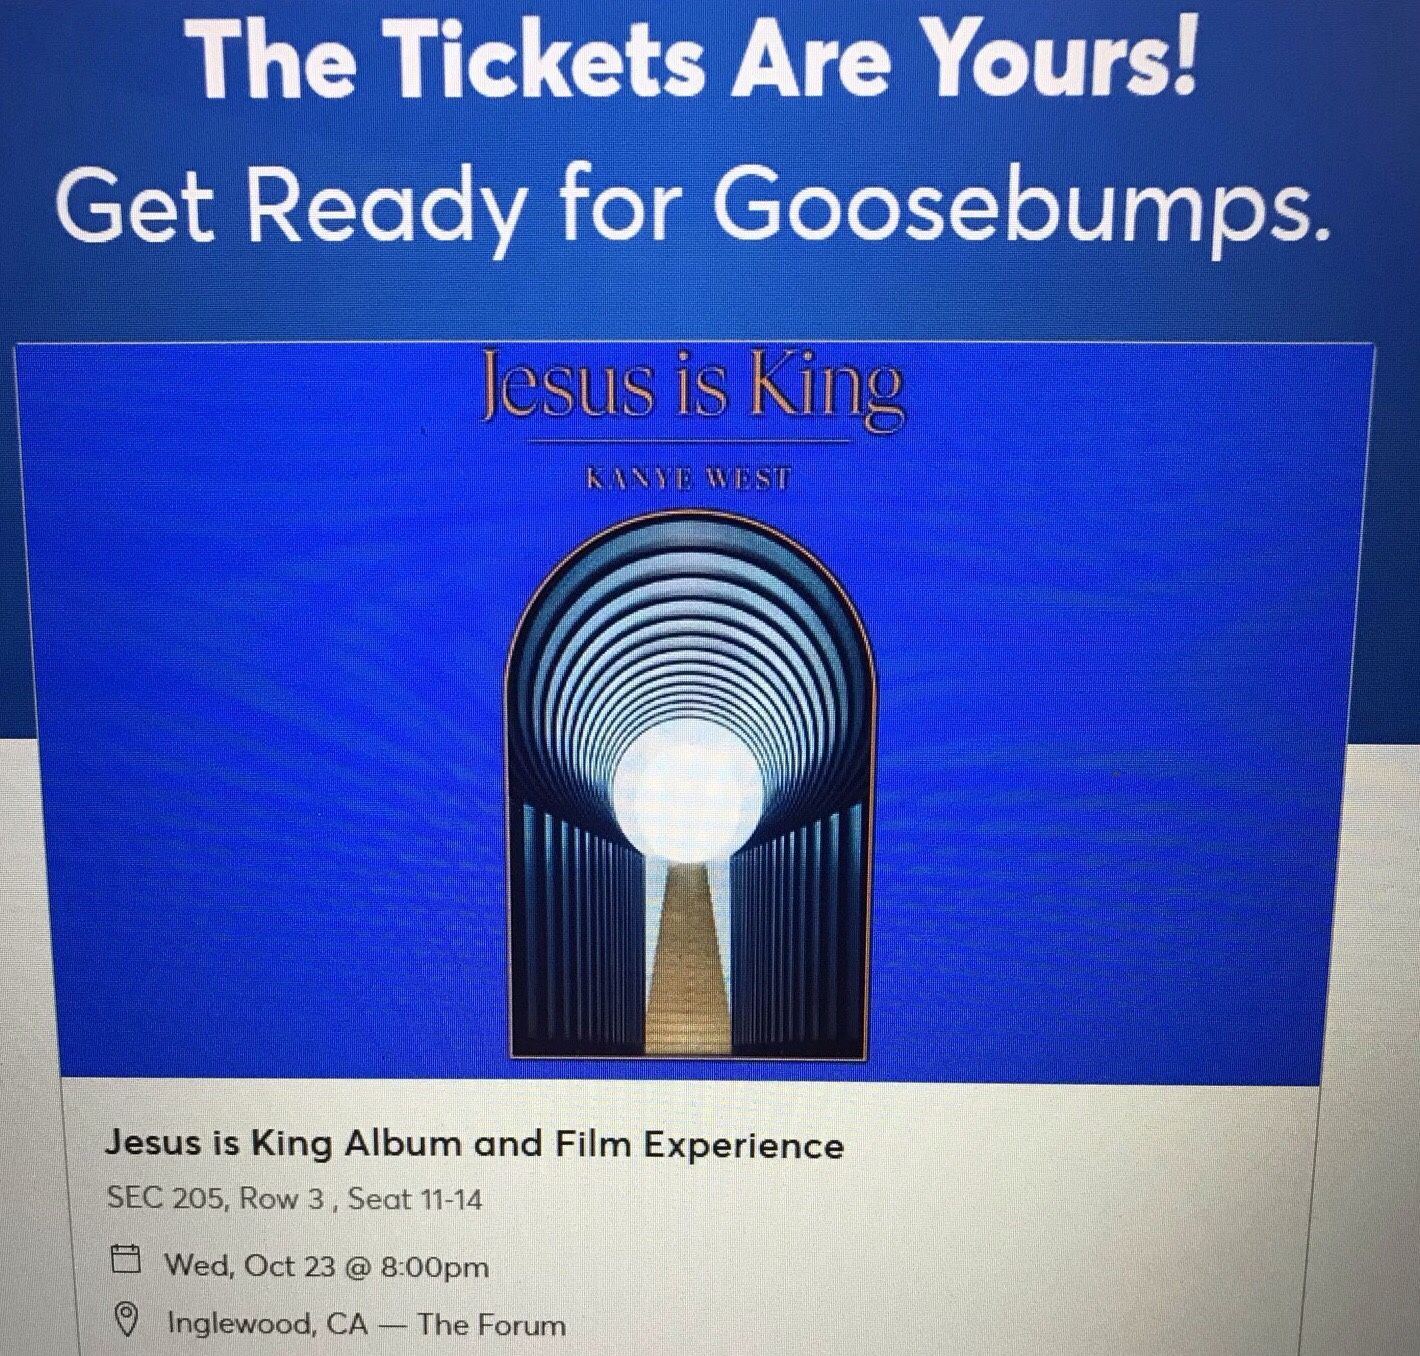 4 Kanye West Jesus is King Album and Film Tickets - Forum LA SOLD OUT 10/23 WED